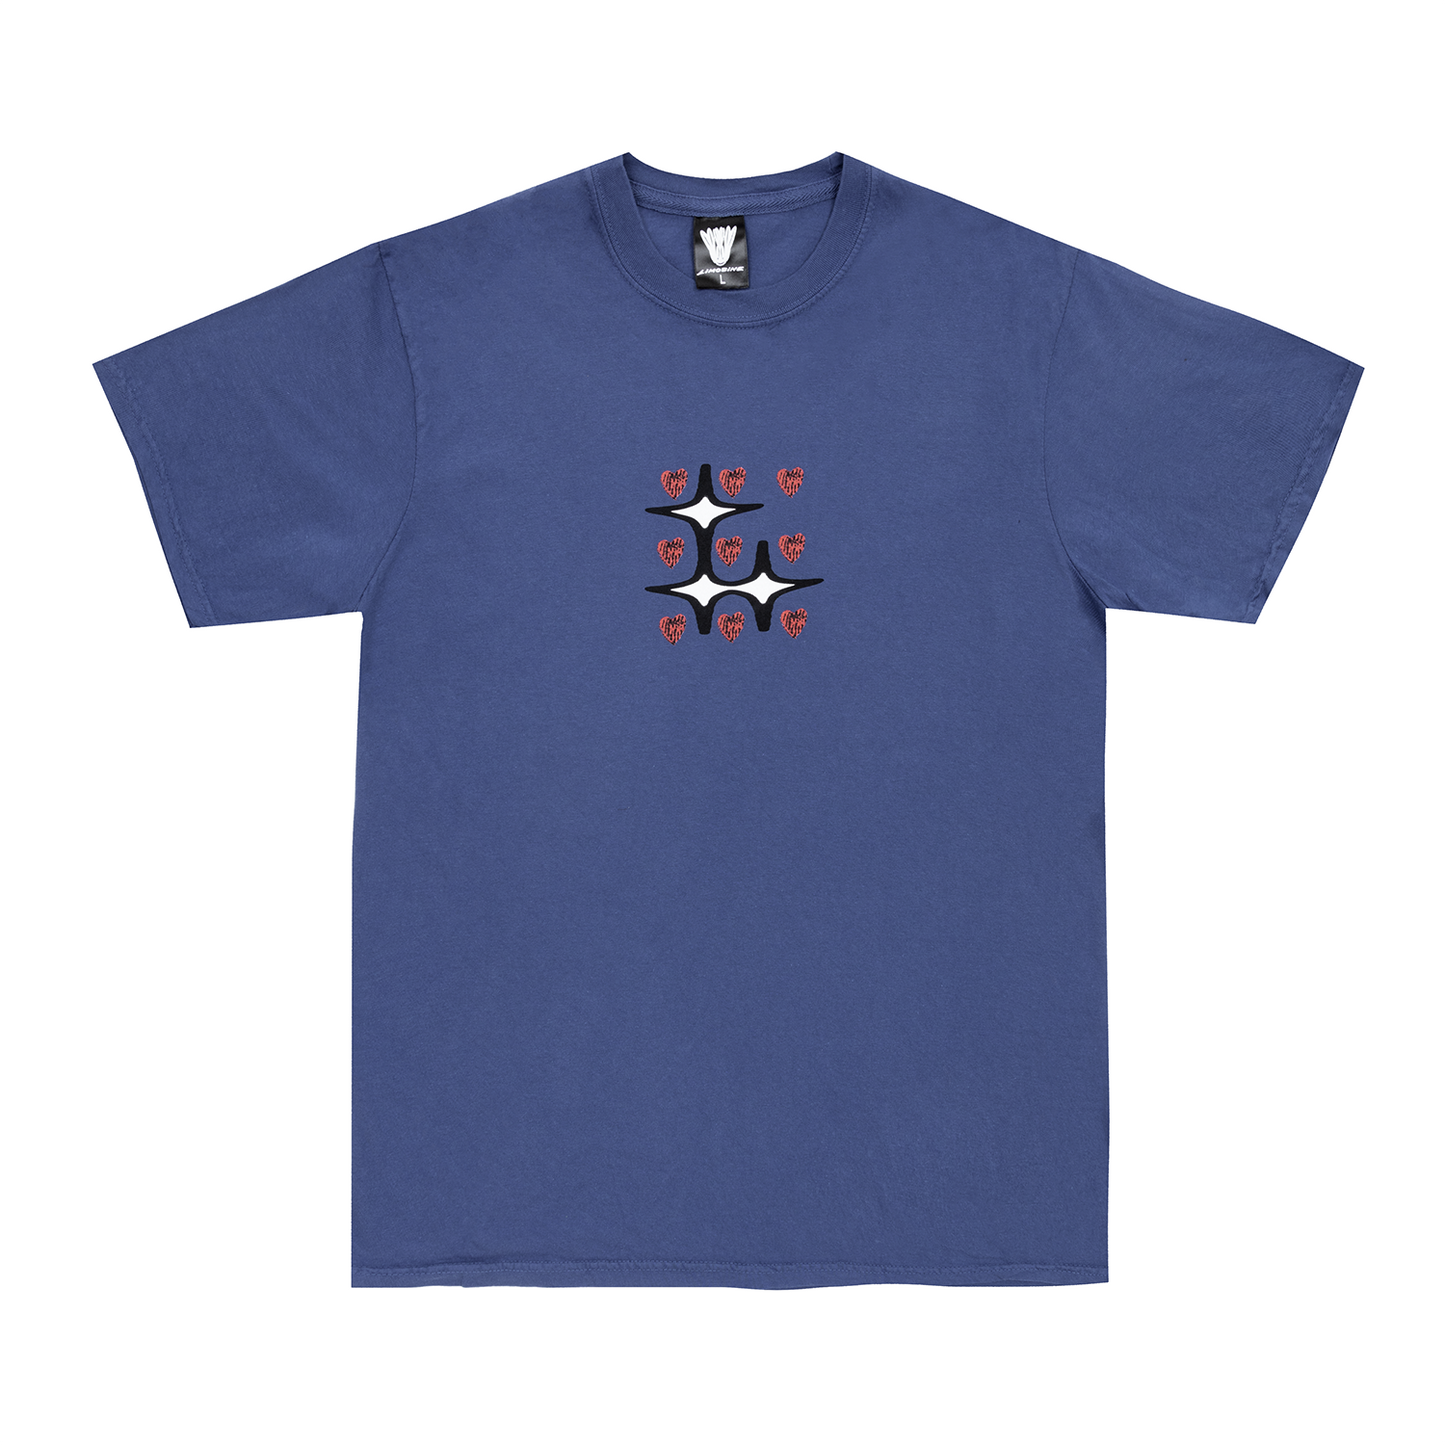 L-Star Tee - Pigment Dyed Deep Blue